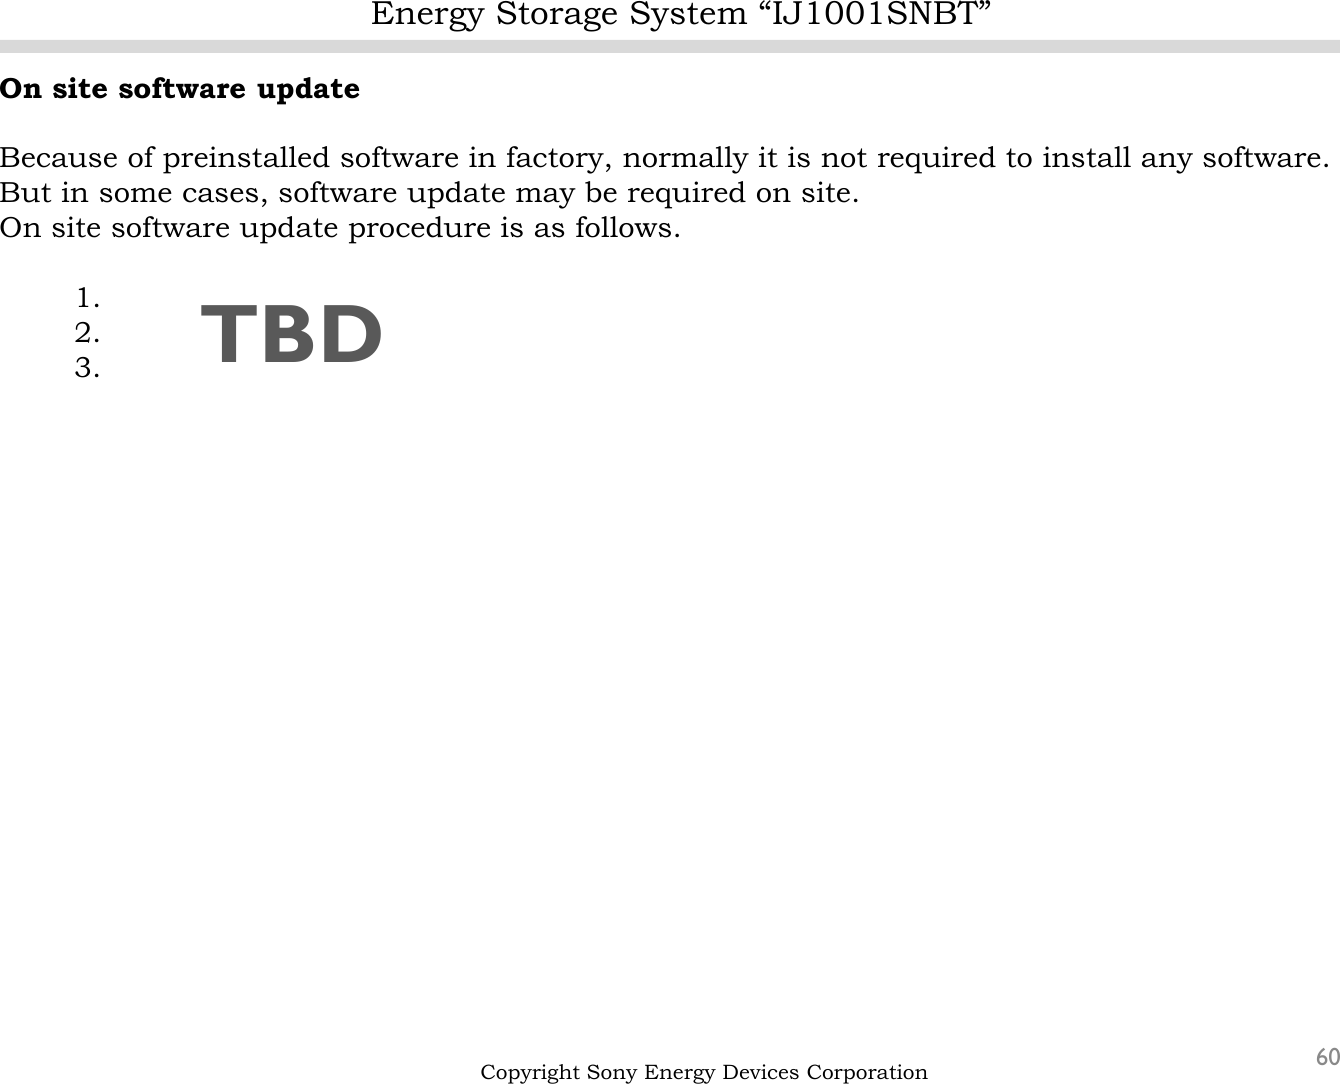 Energy Storage System “IJ1001SNBT”60Copyright Sony Energy Devices CorporationOn site software updateBecause of preinstalled software in factory, normally it is not required to install any software.But in some cases, software update may be required on site.On site software update procedure is as follows. 1.2.3. TBD